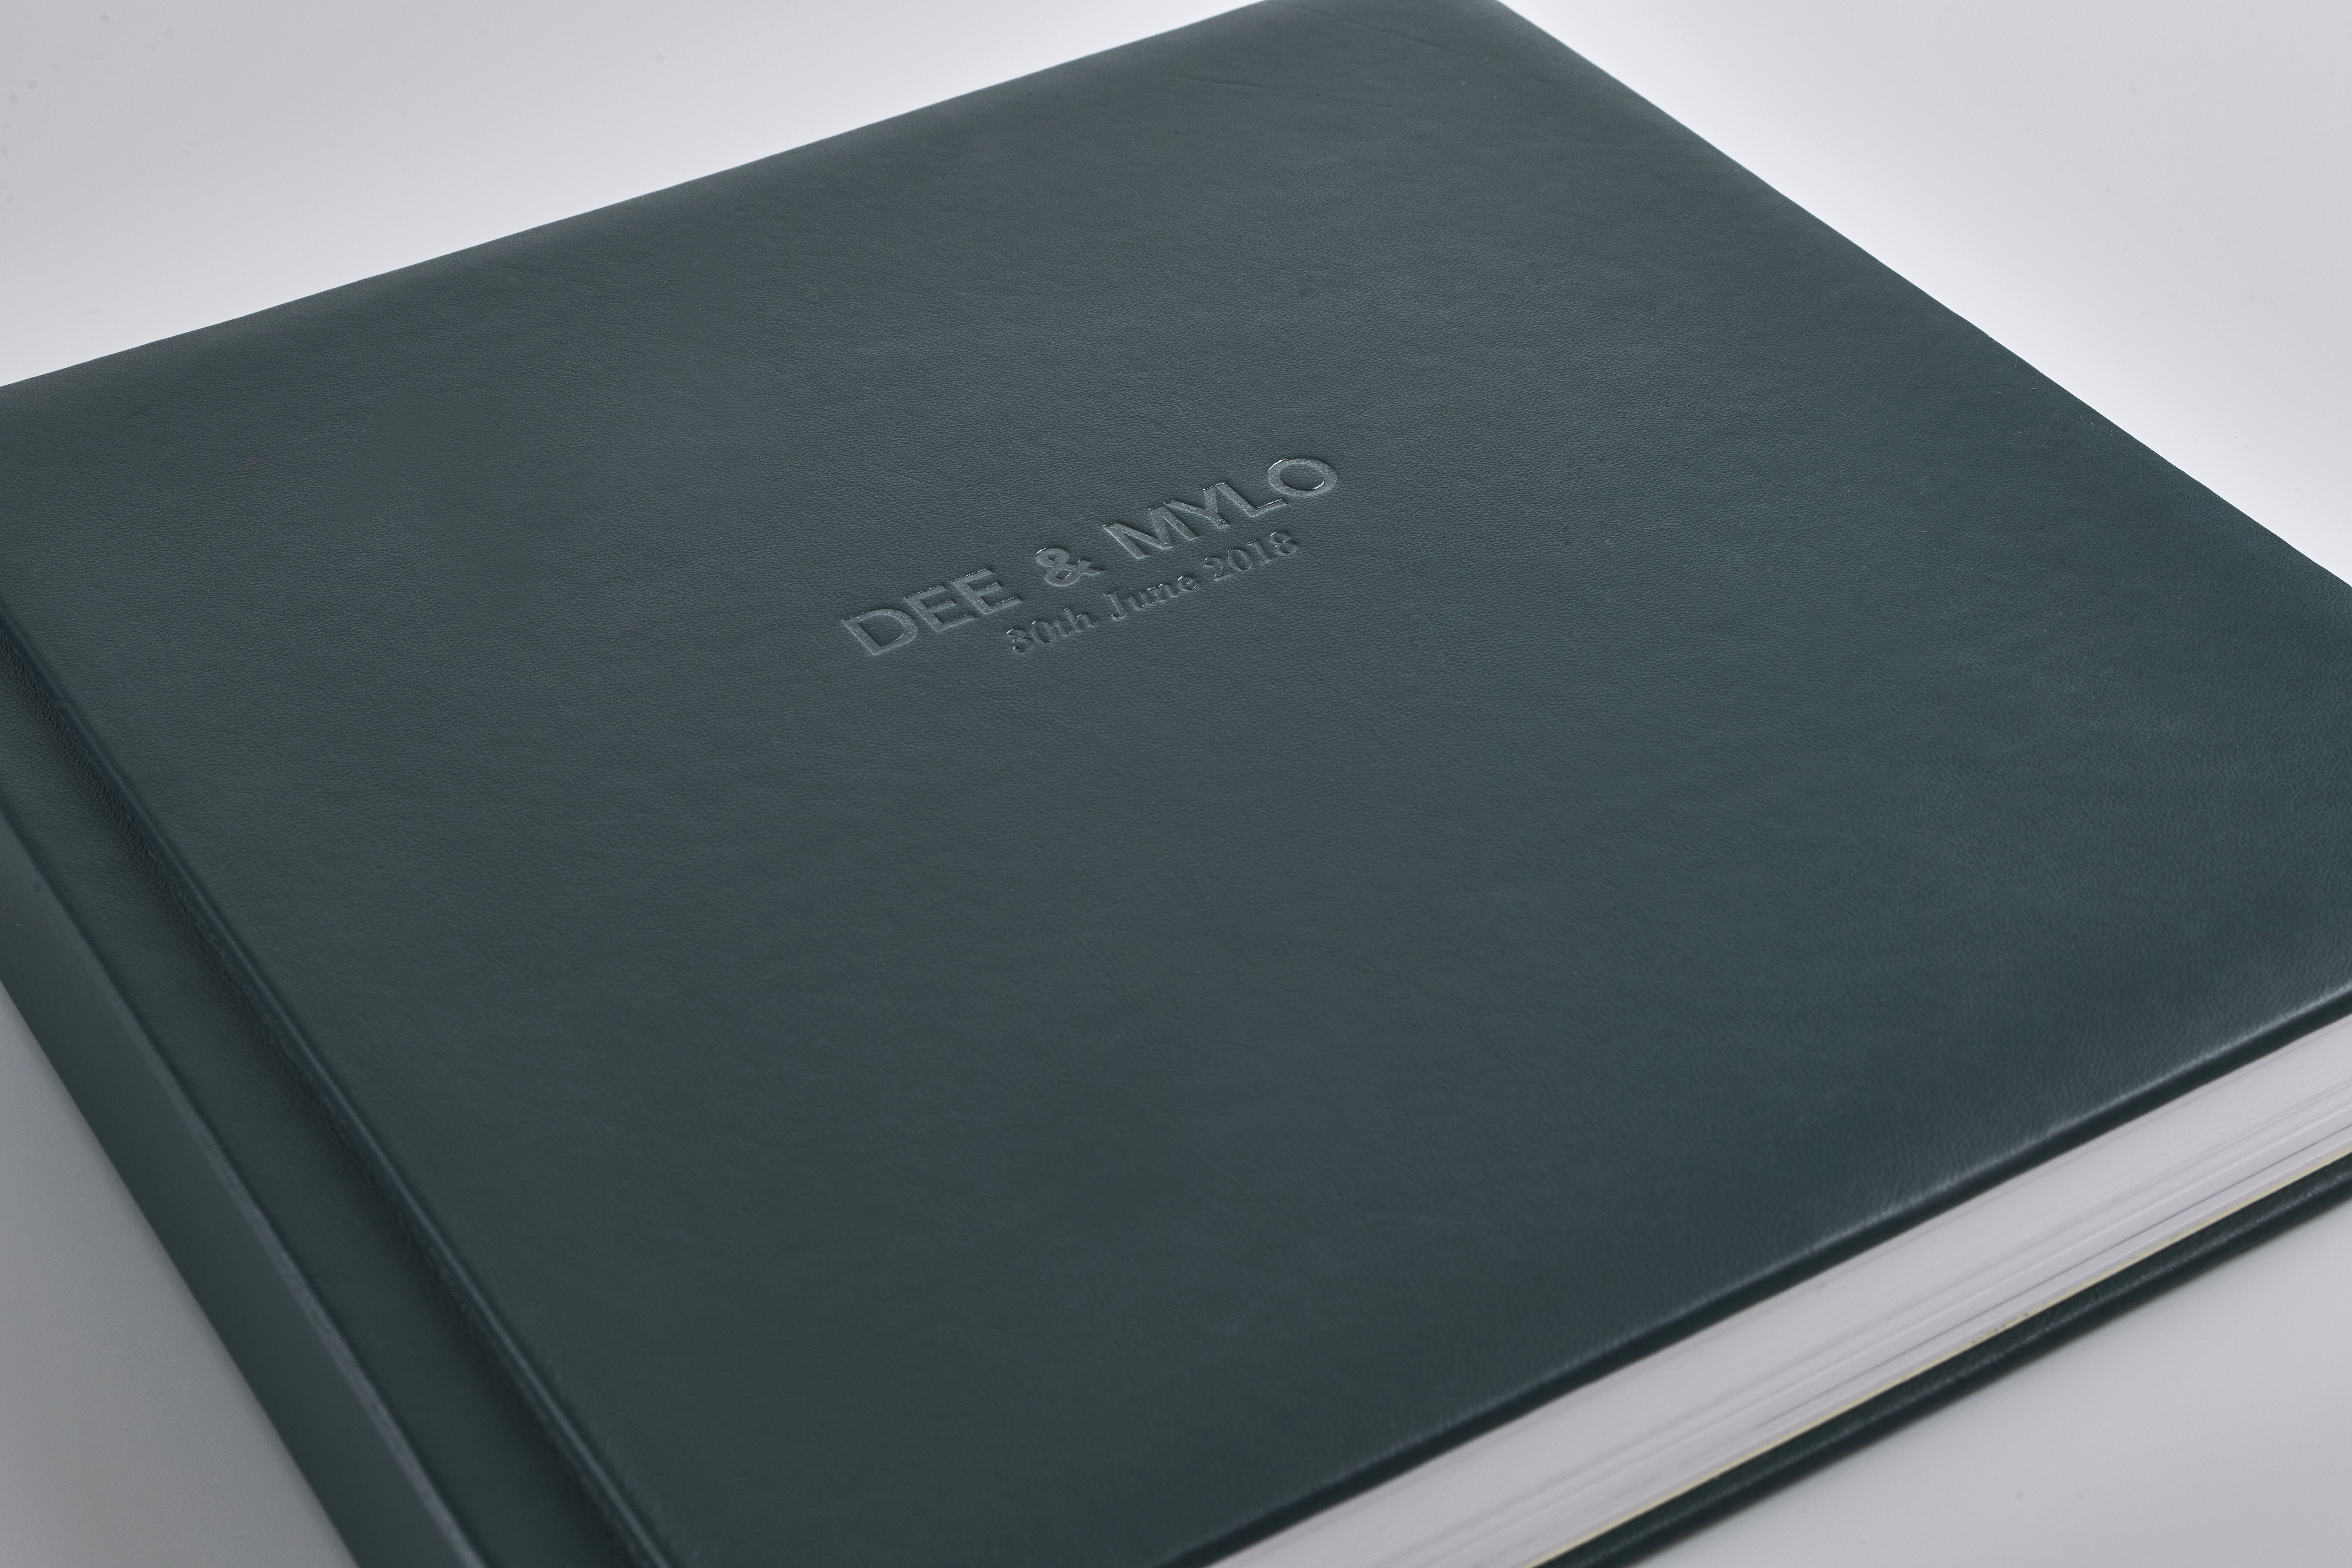 Details of a custom leather photo album with embossed title